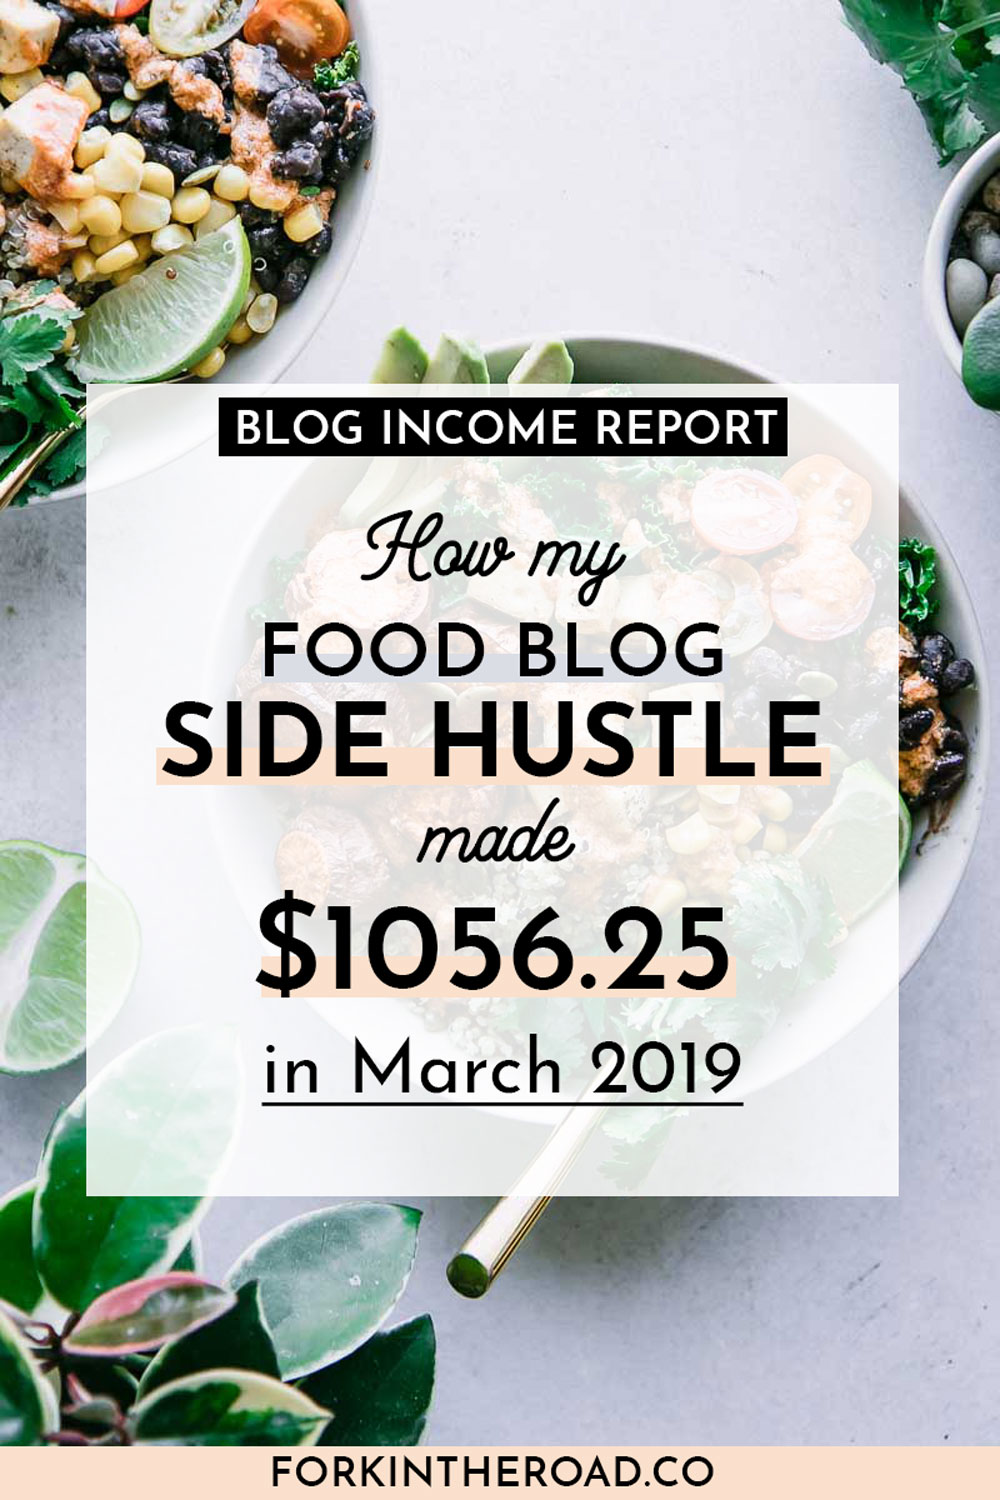 March 2019 Food Blog Side Hustle Income Report: $1056.25